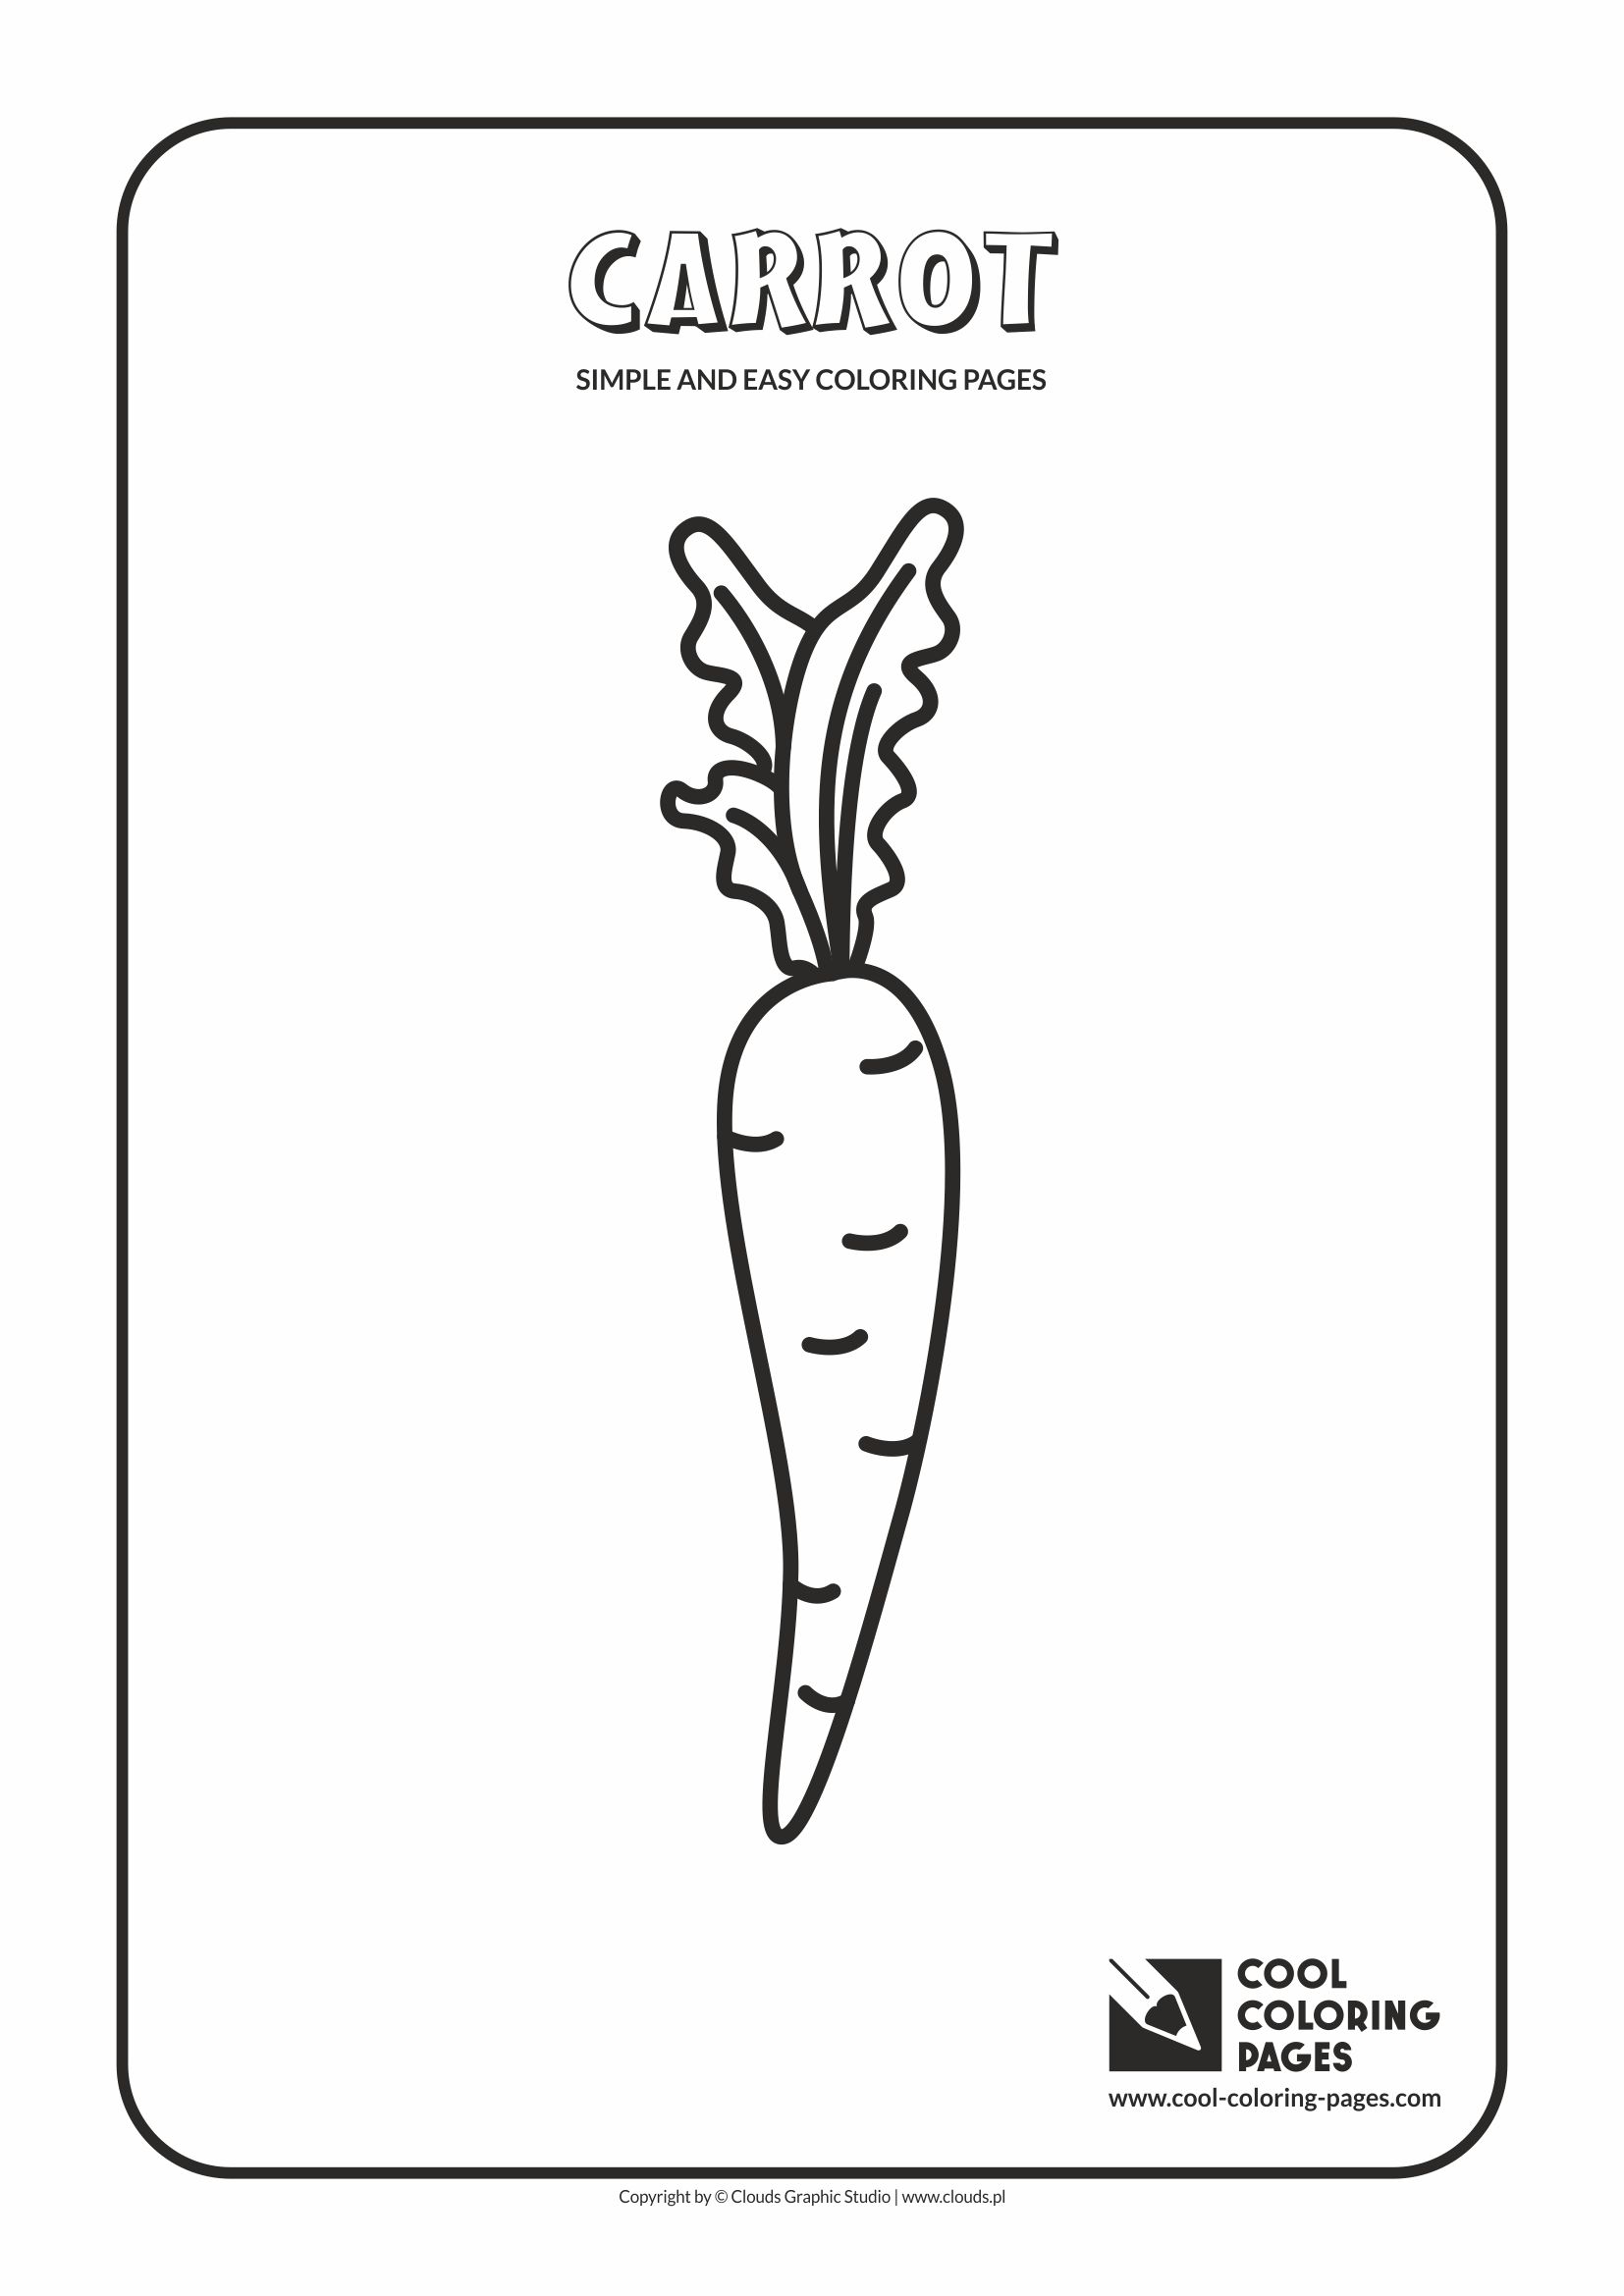 Simple and easy coloring pages for toddlers - Carrot